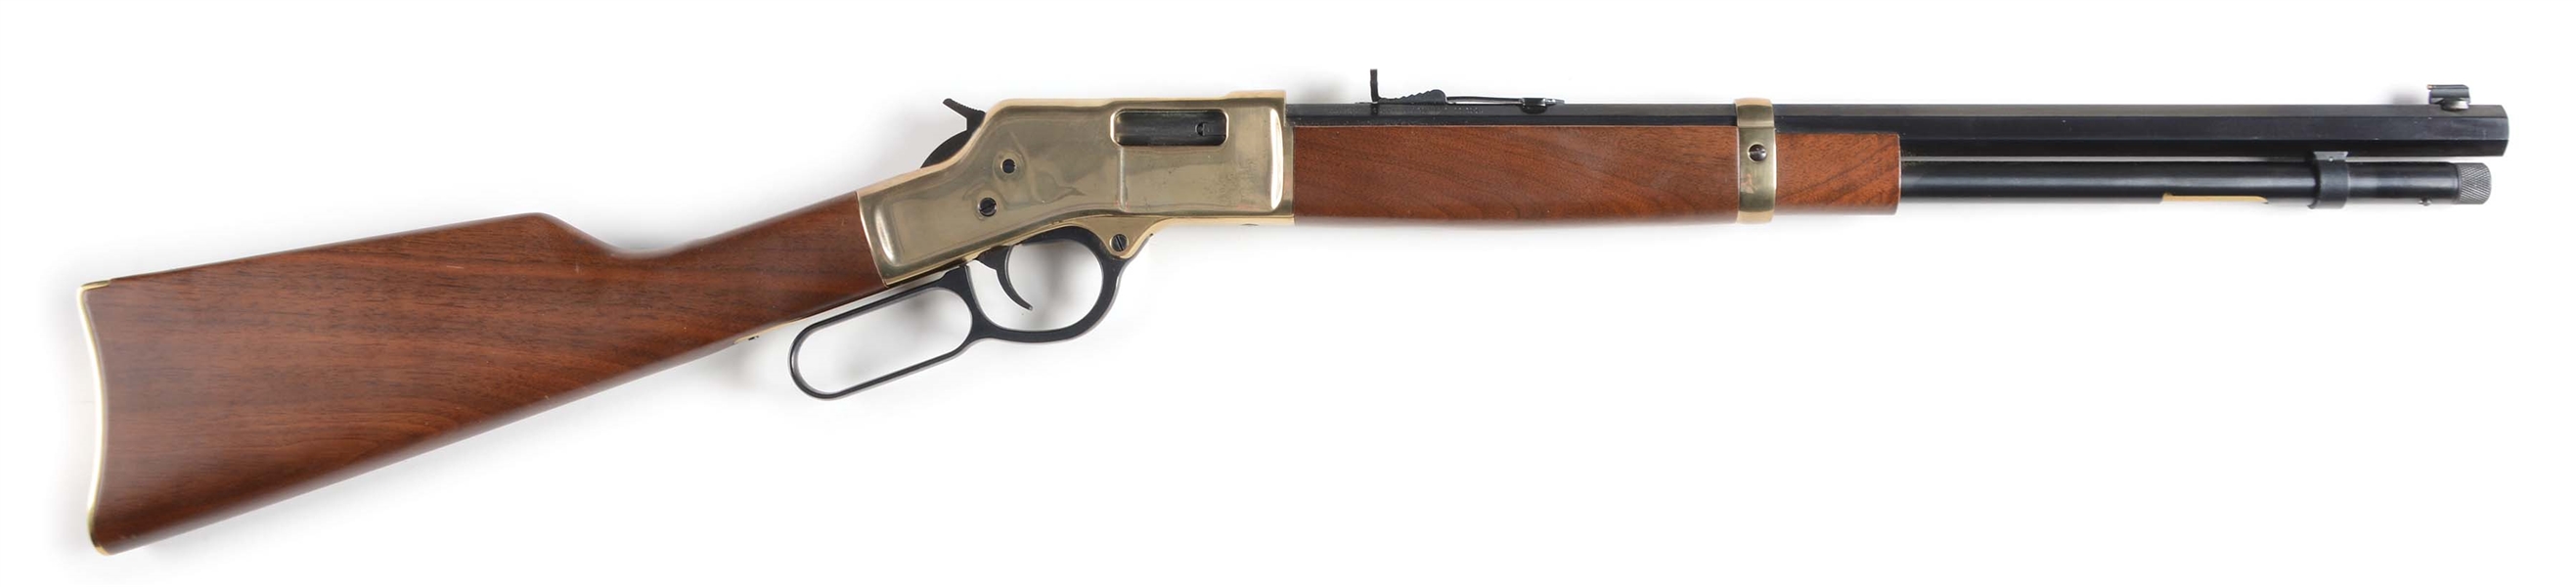 (M) HENRY REPEATING ARMS BIG BORE LEVER ACTION RIFLE.